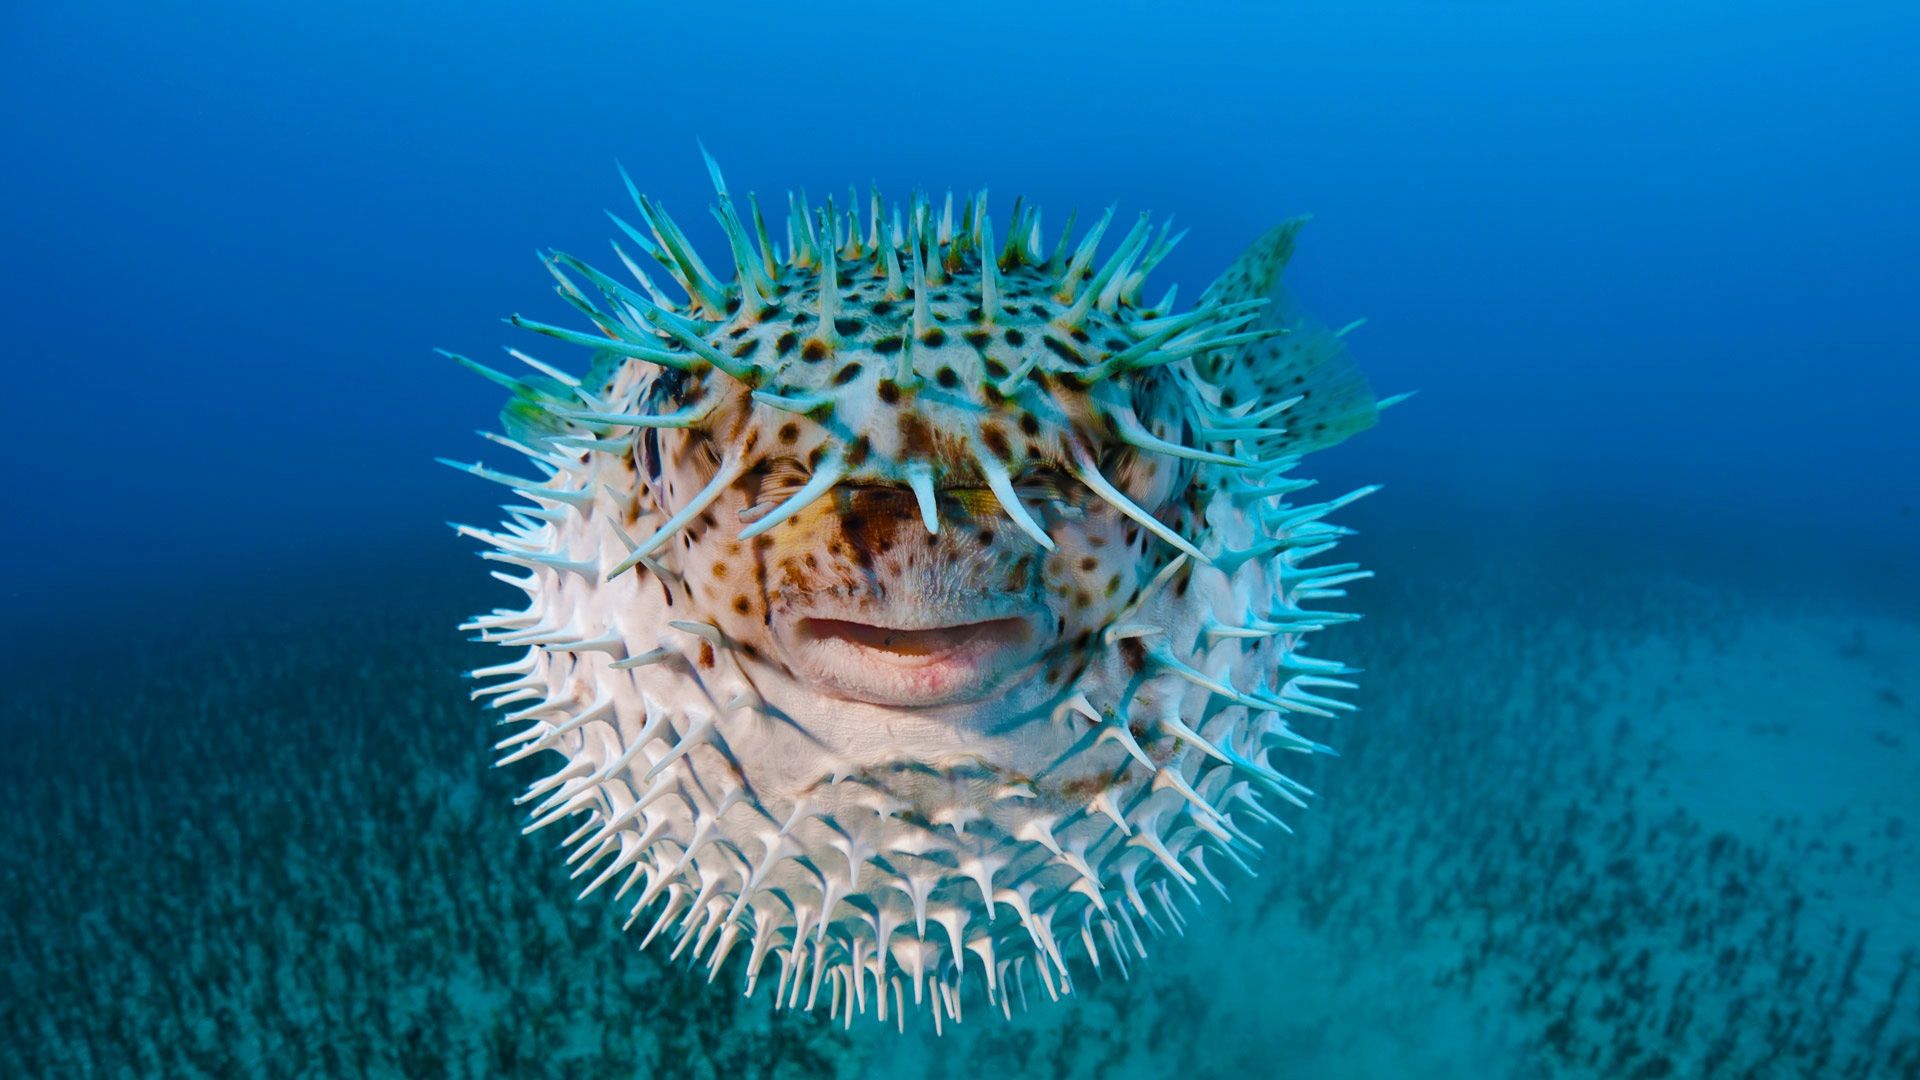 Blowfish Pictures  Download Free Images on Unsplash